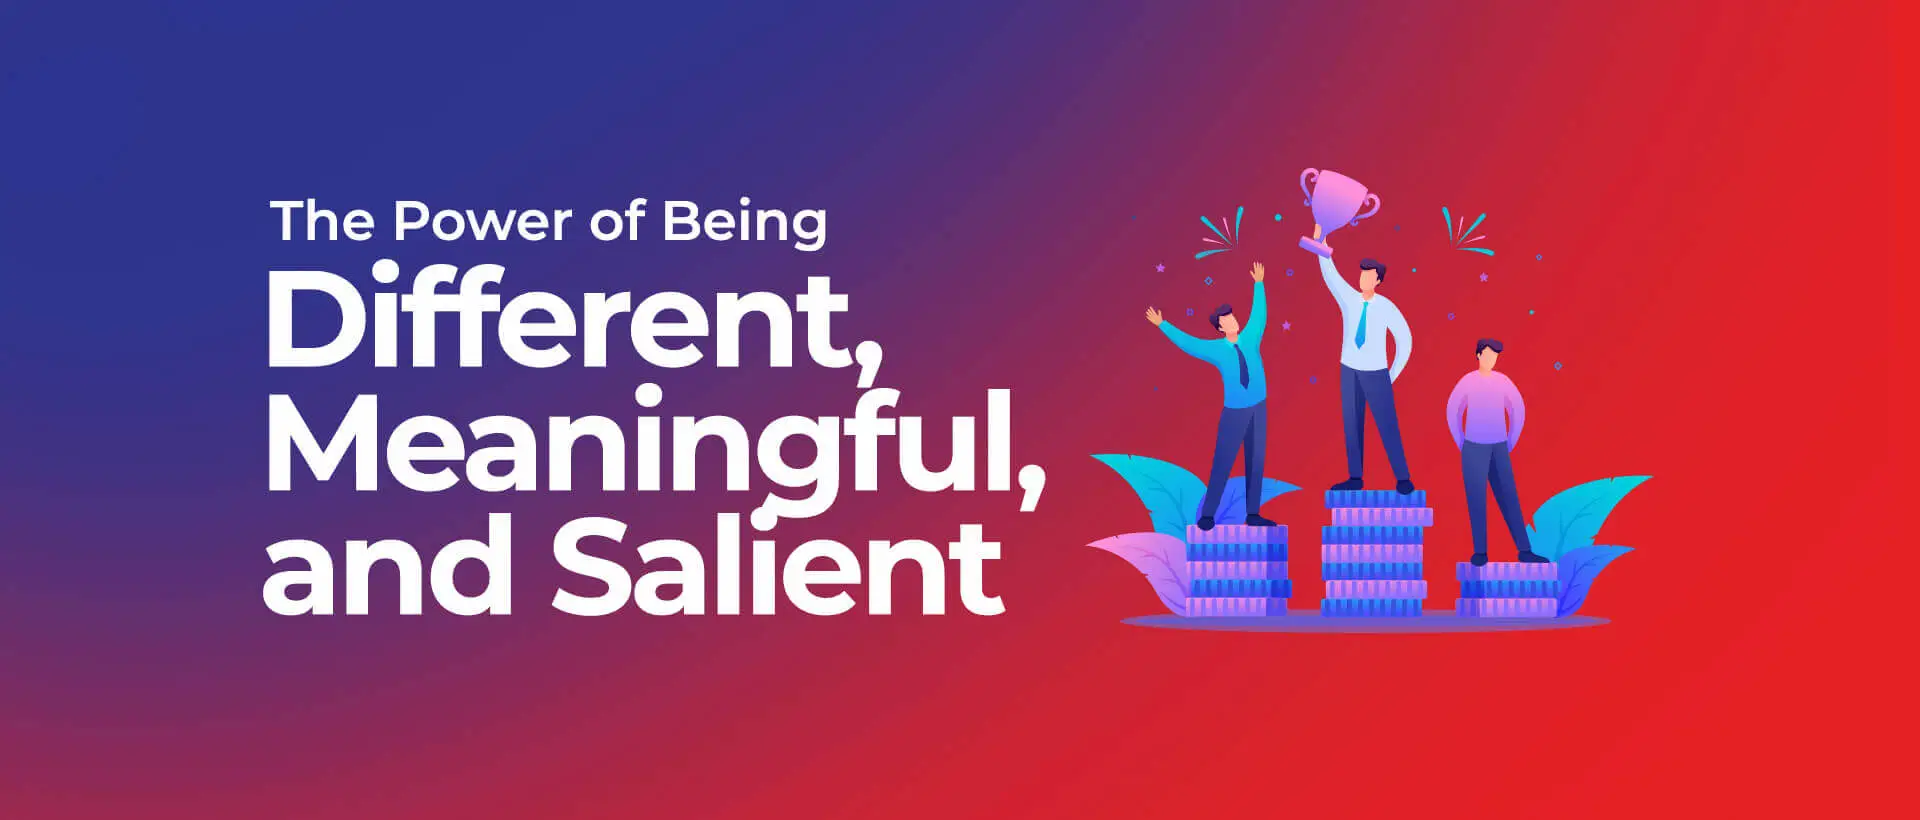 The Power of Being Different, Meaningful, and Salient